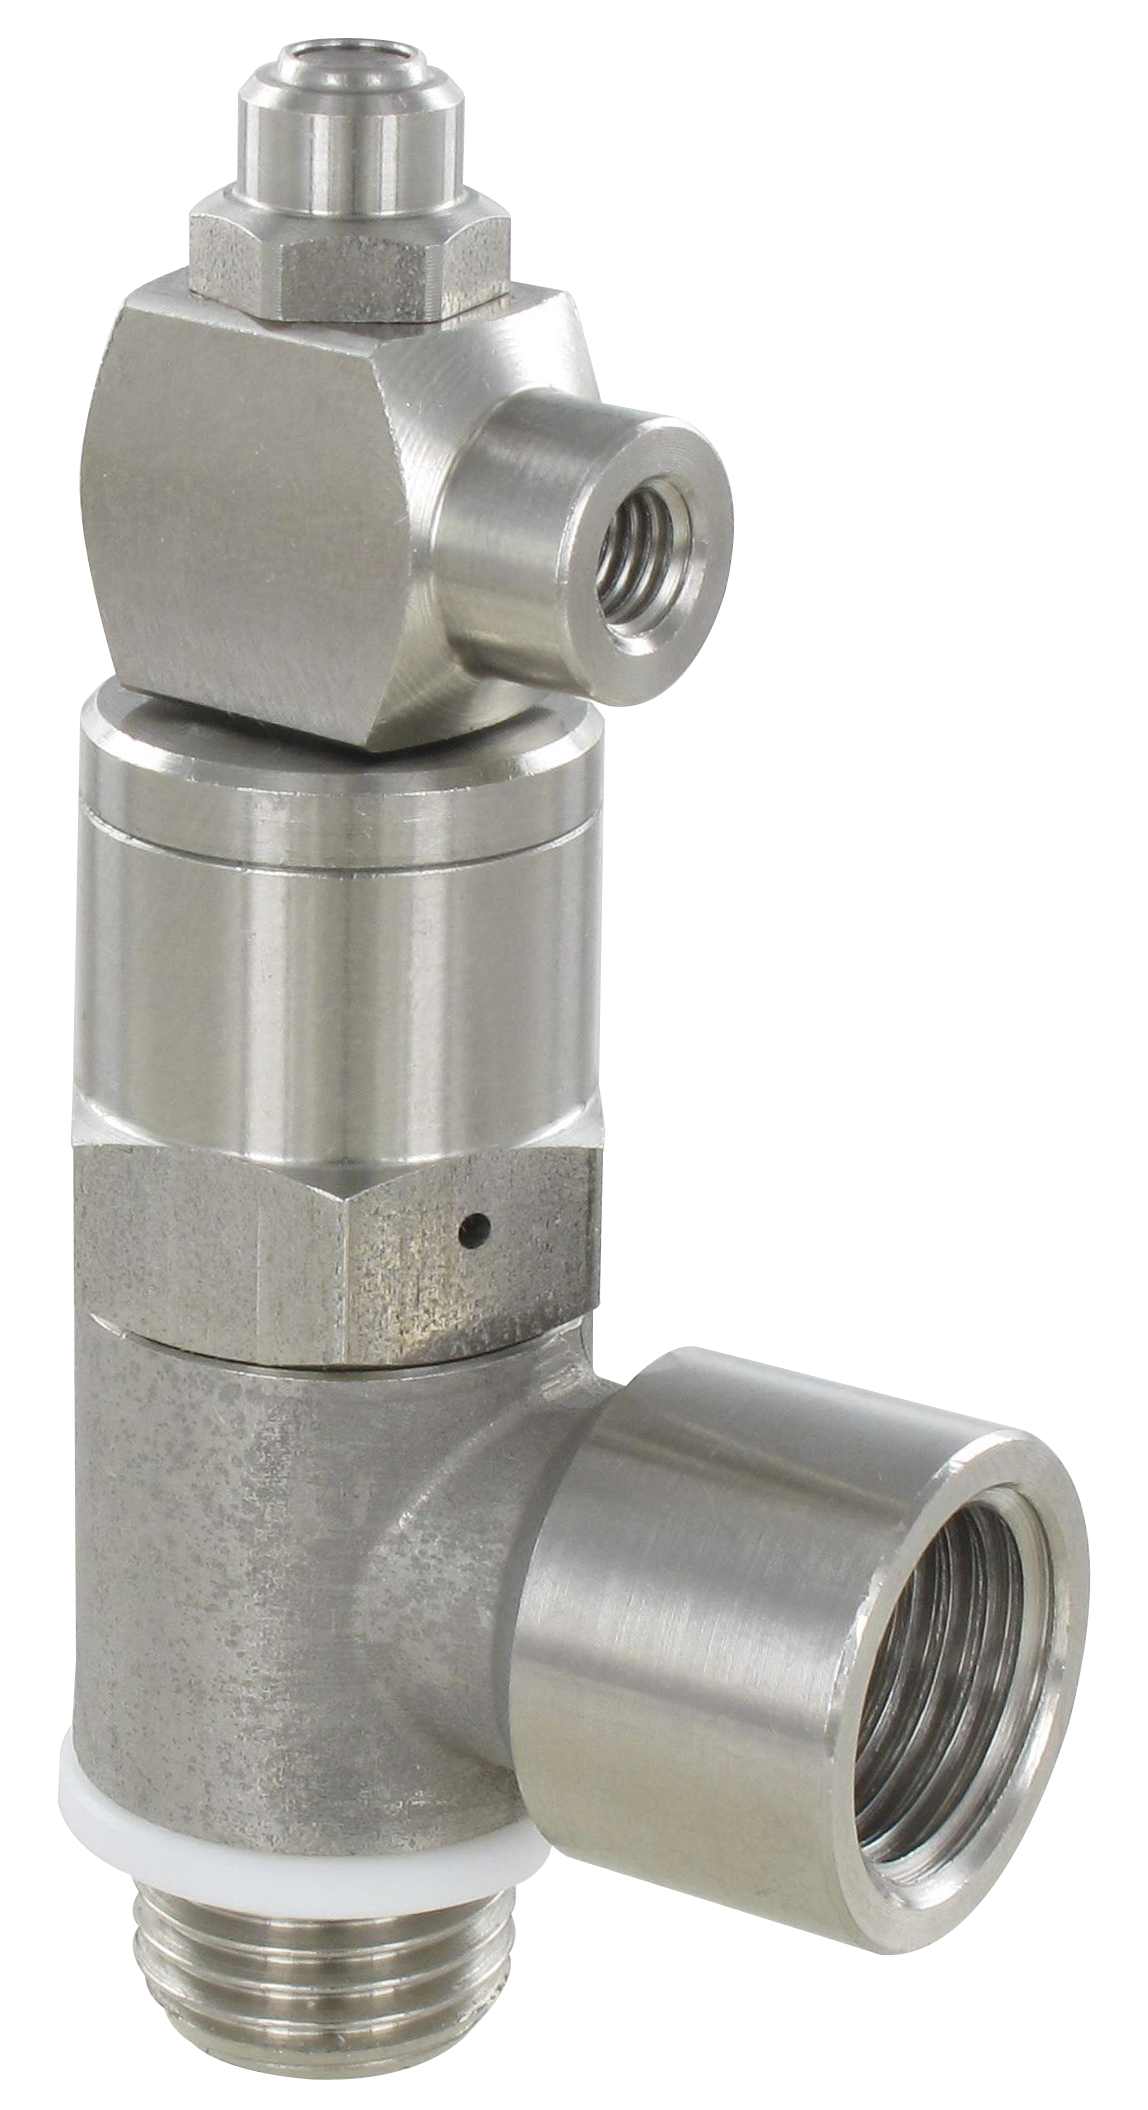 Stainless steel pilot-operated check valves